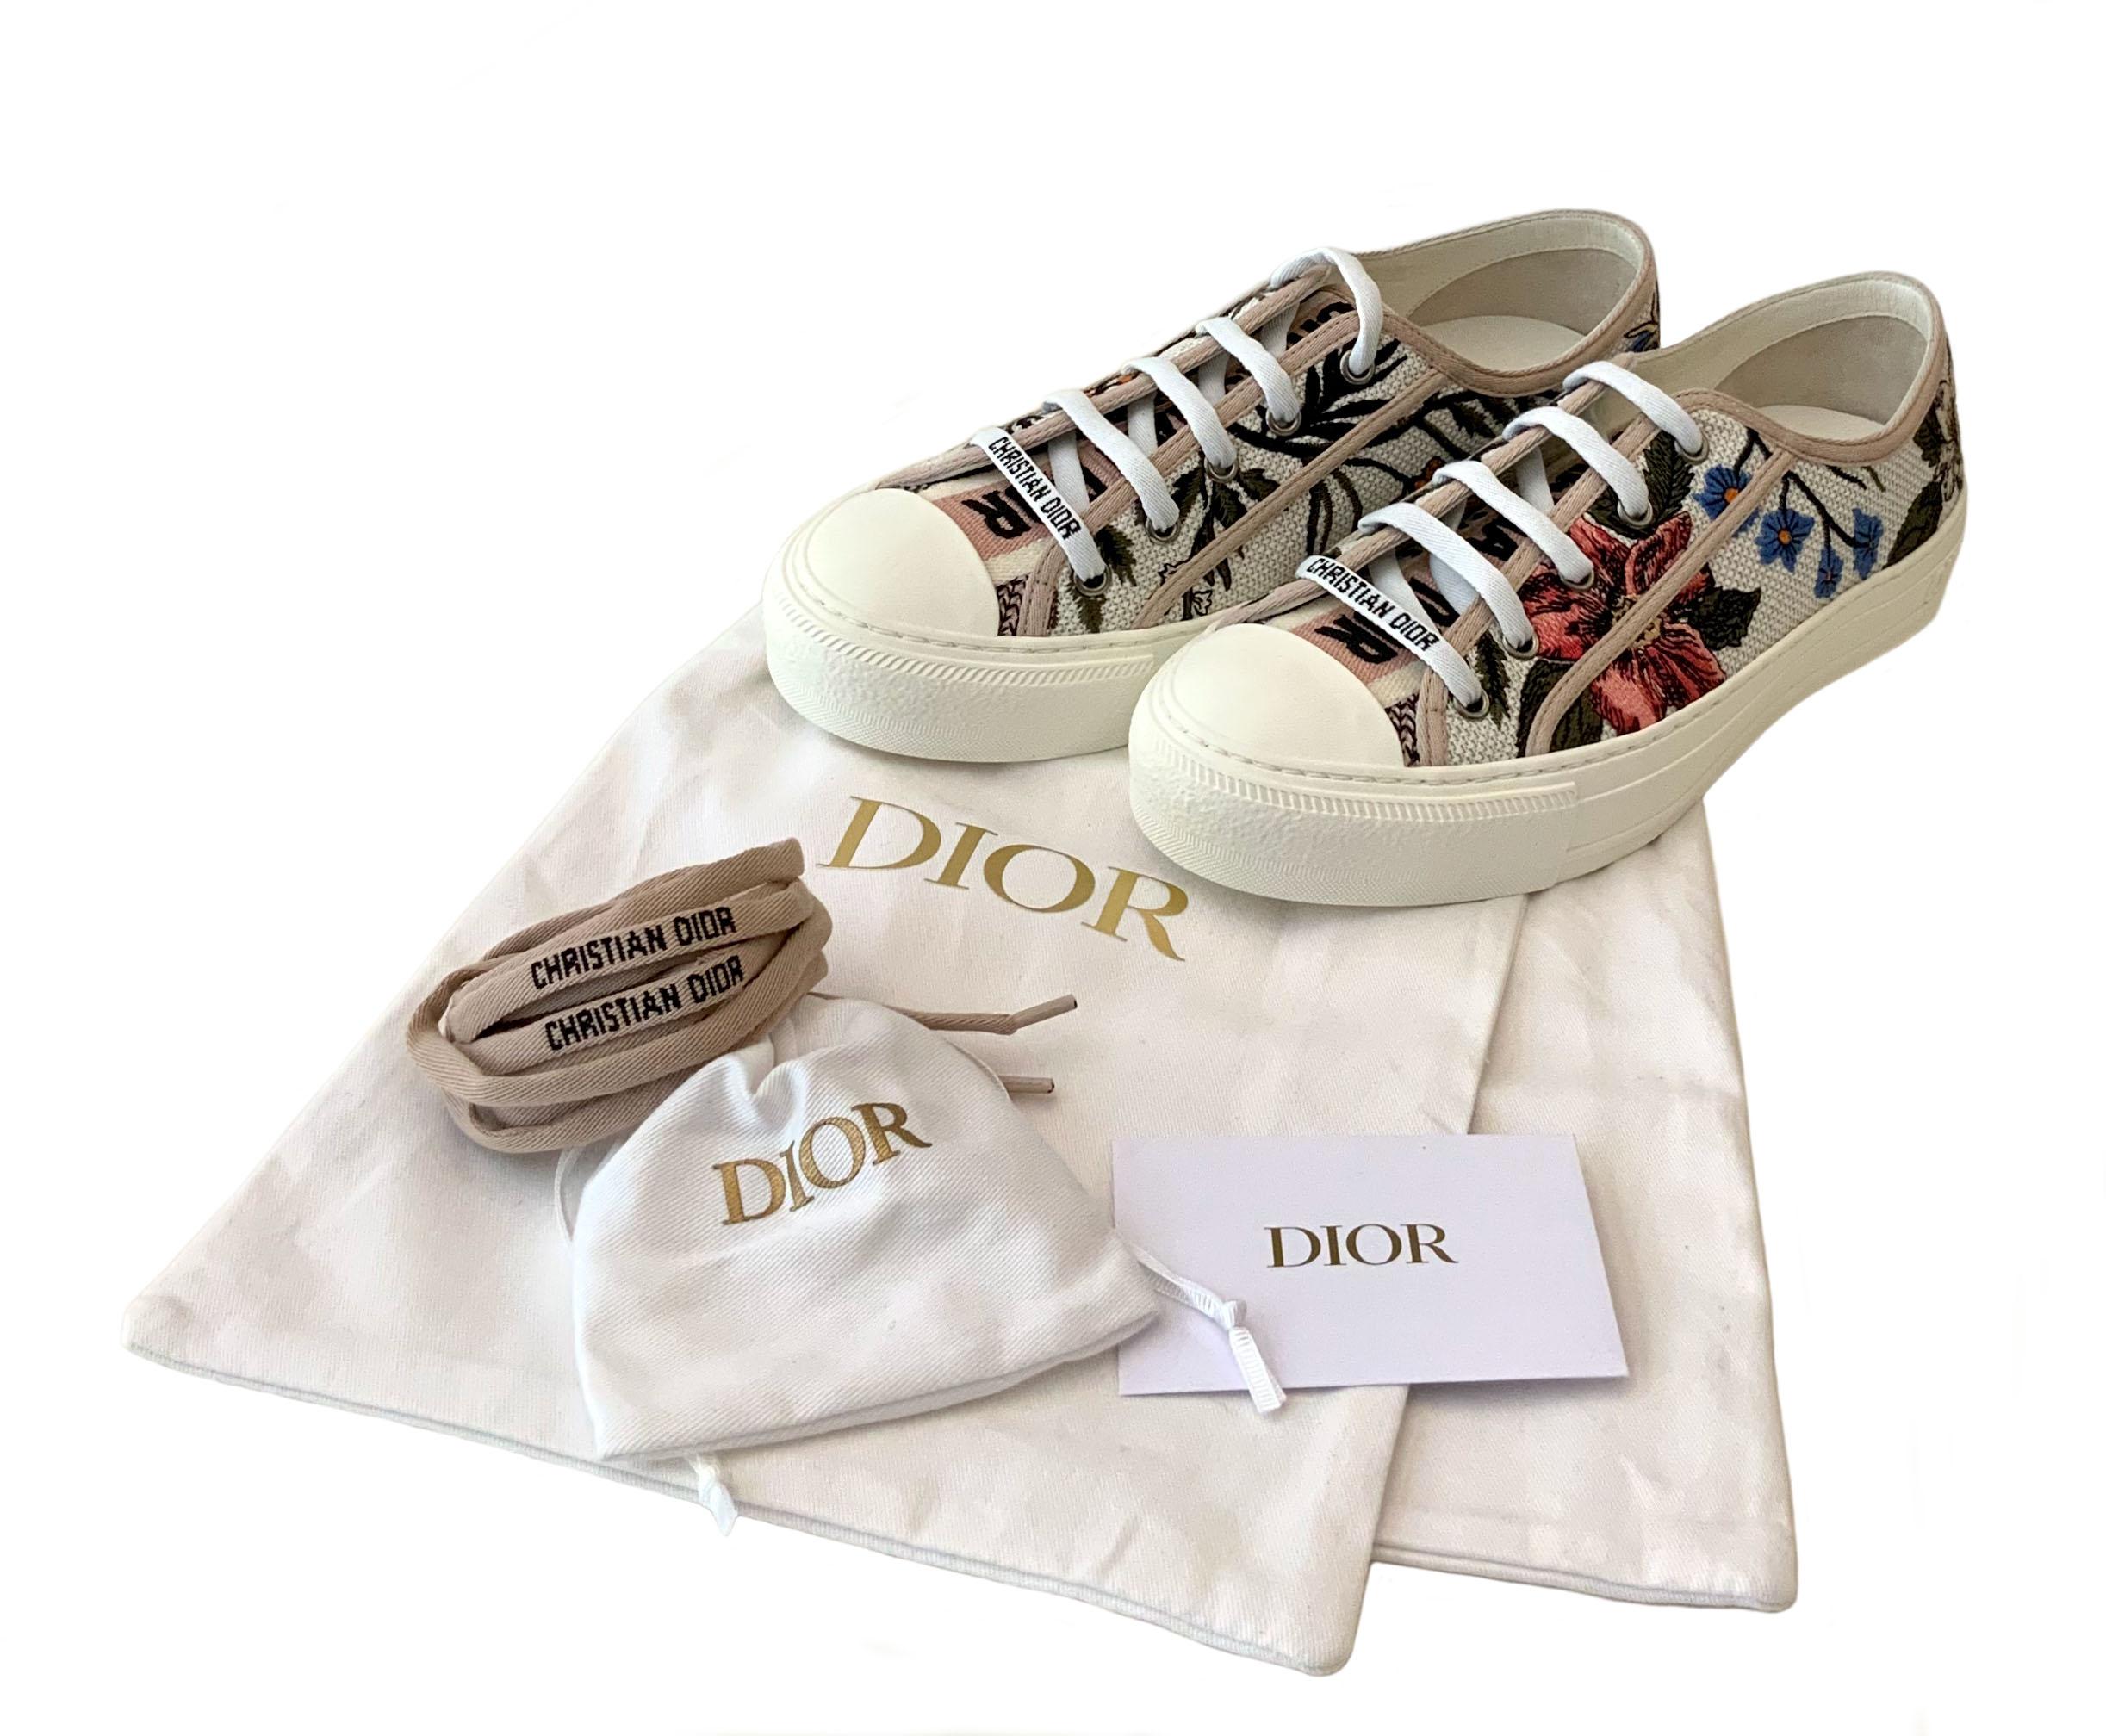 These pre-owned but new Walk'n Dior sneakers from Christian Dior are crafted in a beautiful multicolored embroidered coton. 
They features the Rosa Mutabilis motif, completed by signatures on the tongue, rubber sole and laces.

Collection: Fall